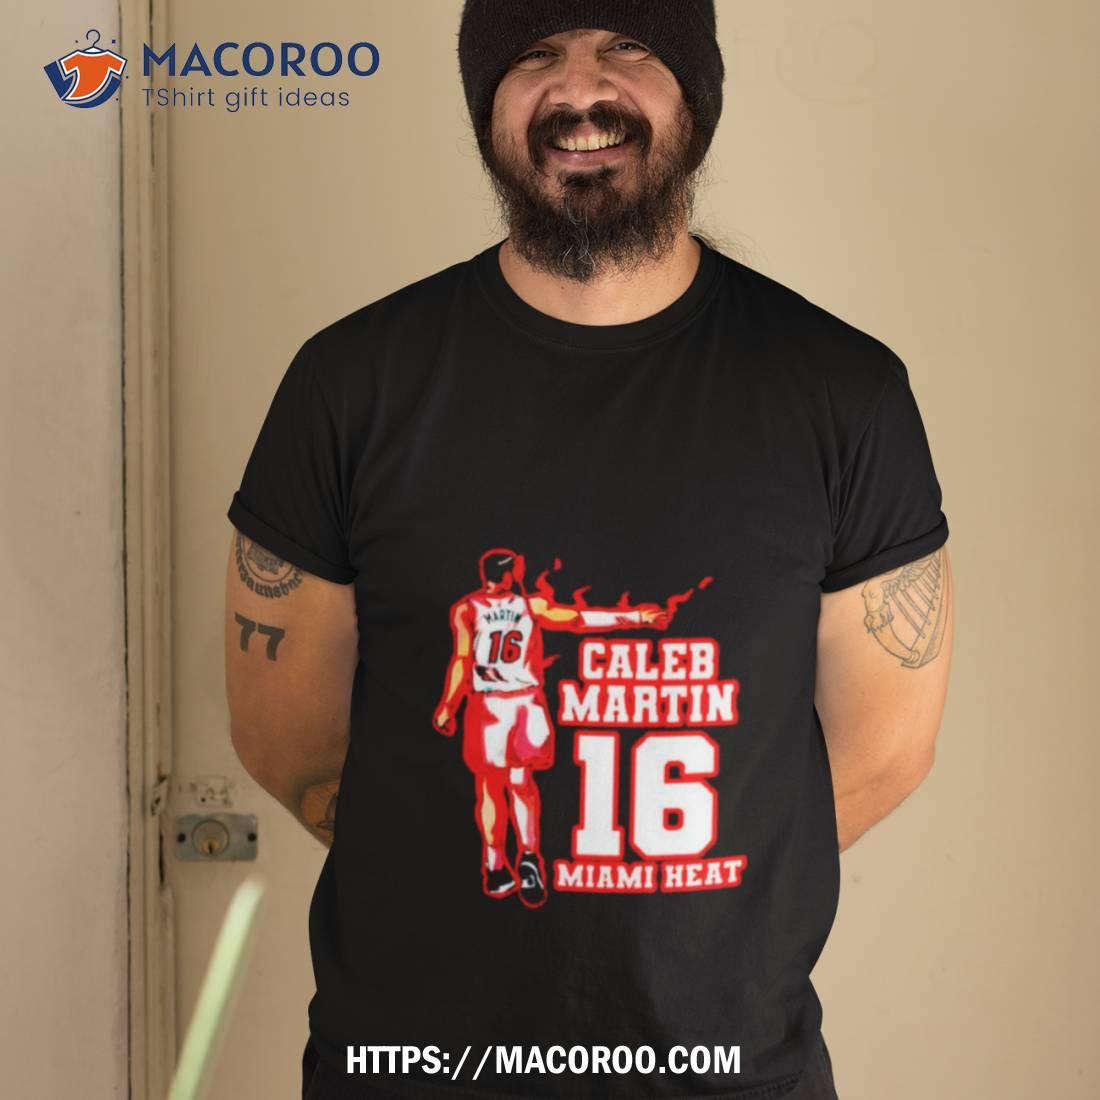 Caleb Martin Miami Heat Shirt - Bring Your Ideas, Thoughts And